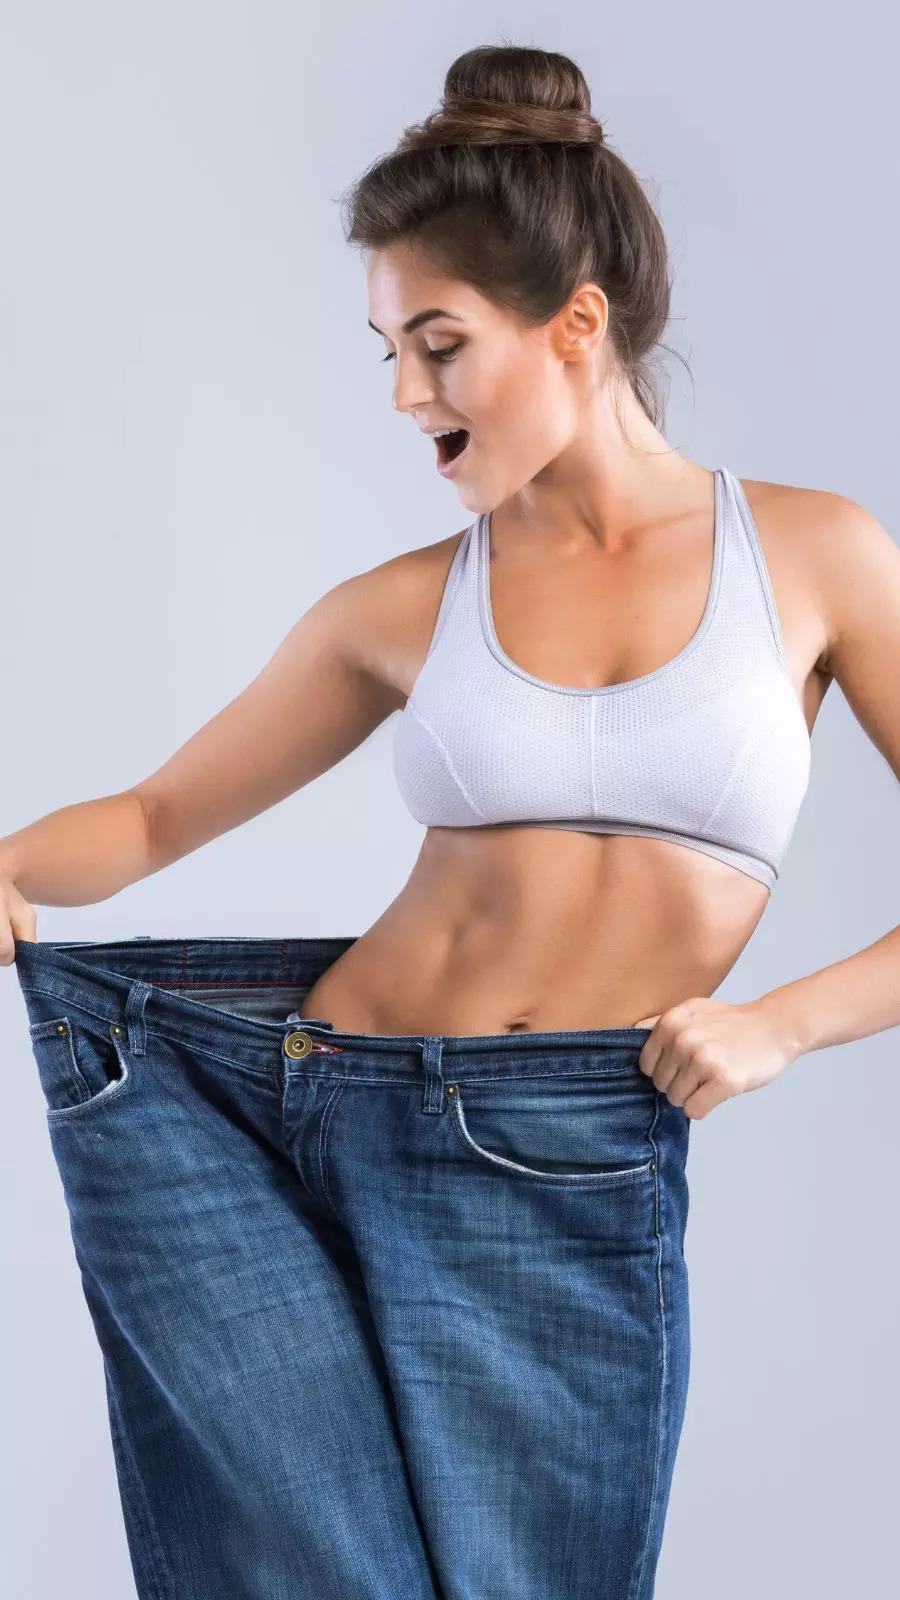 how to lose weight fast: Proven ways to lose weight without